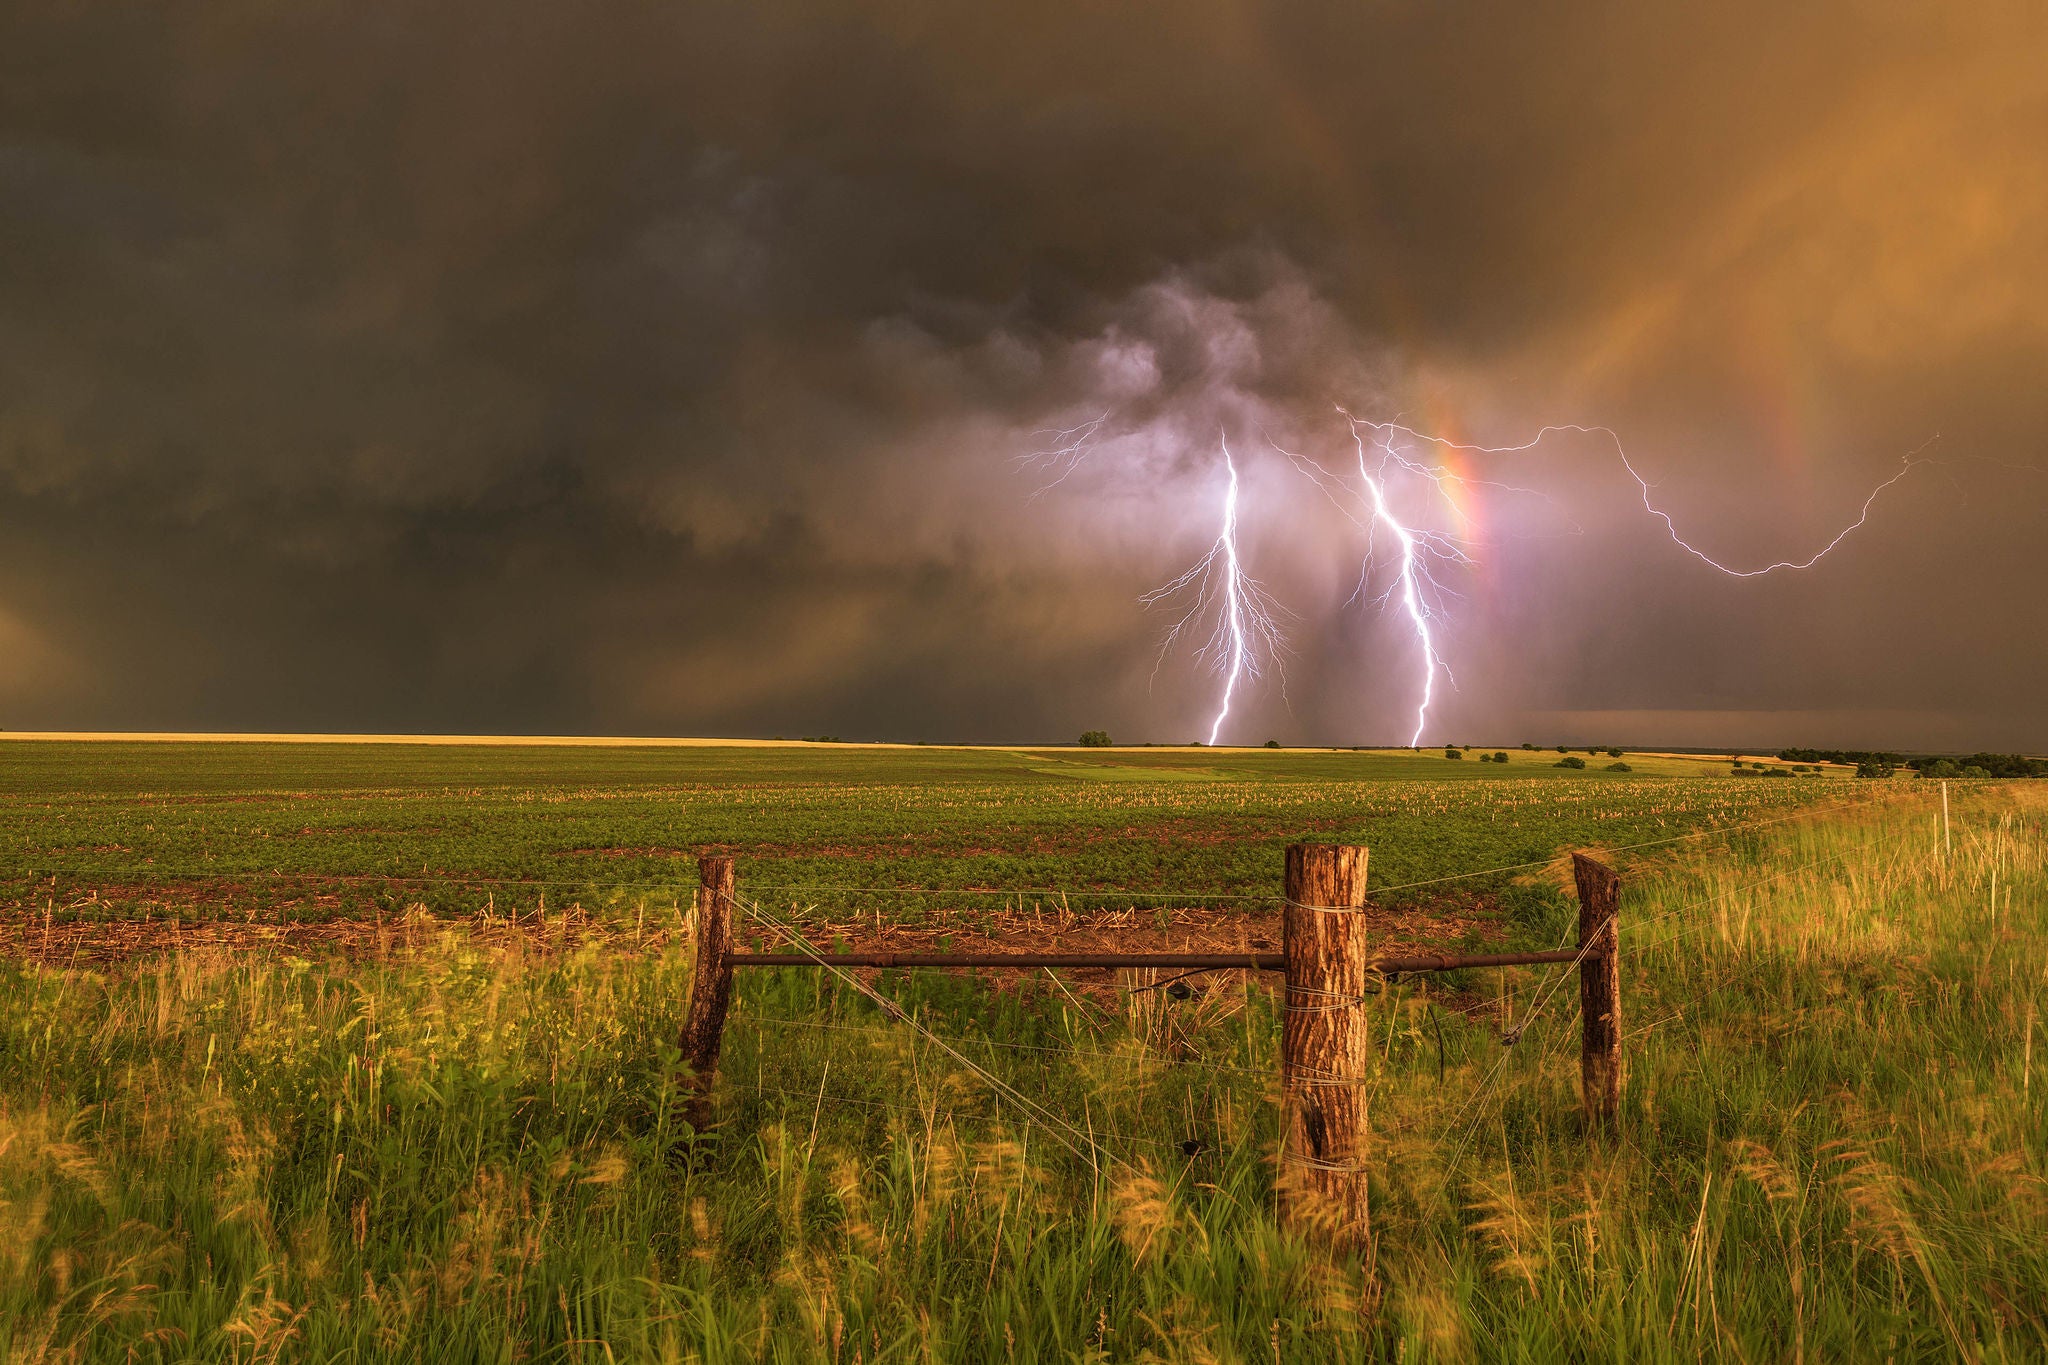 Severe thunderstorm sunset with a double rainbow and lightning on the high plains of Nebraska. USA